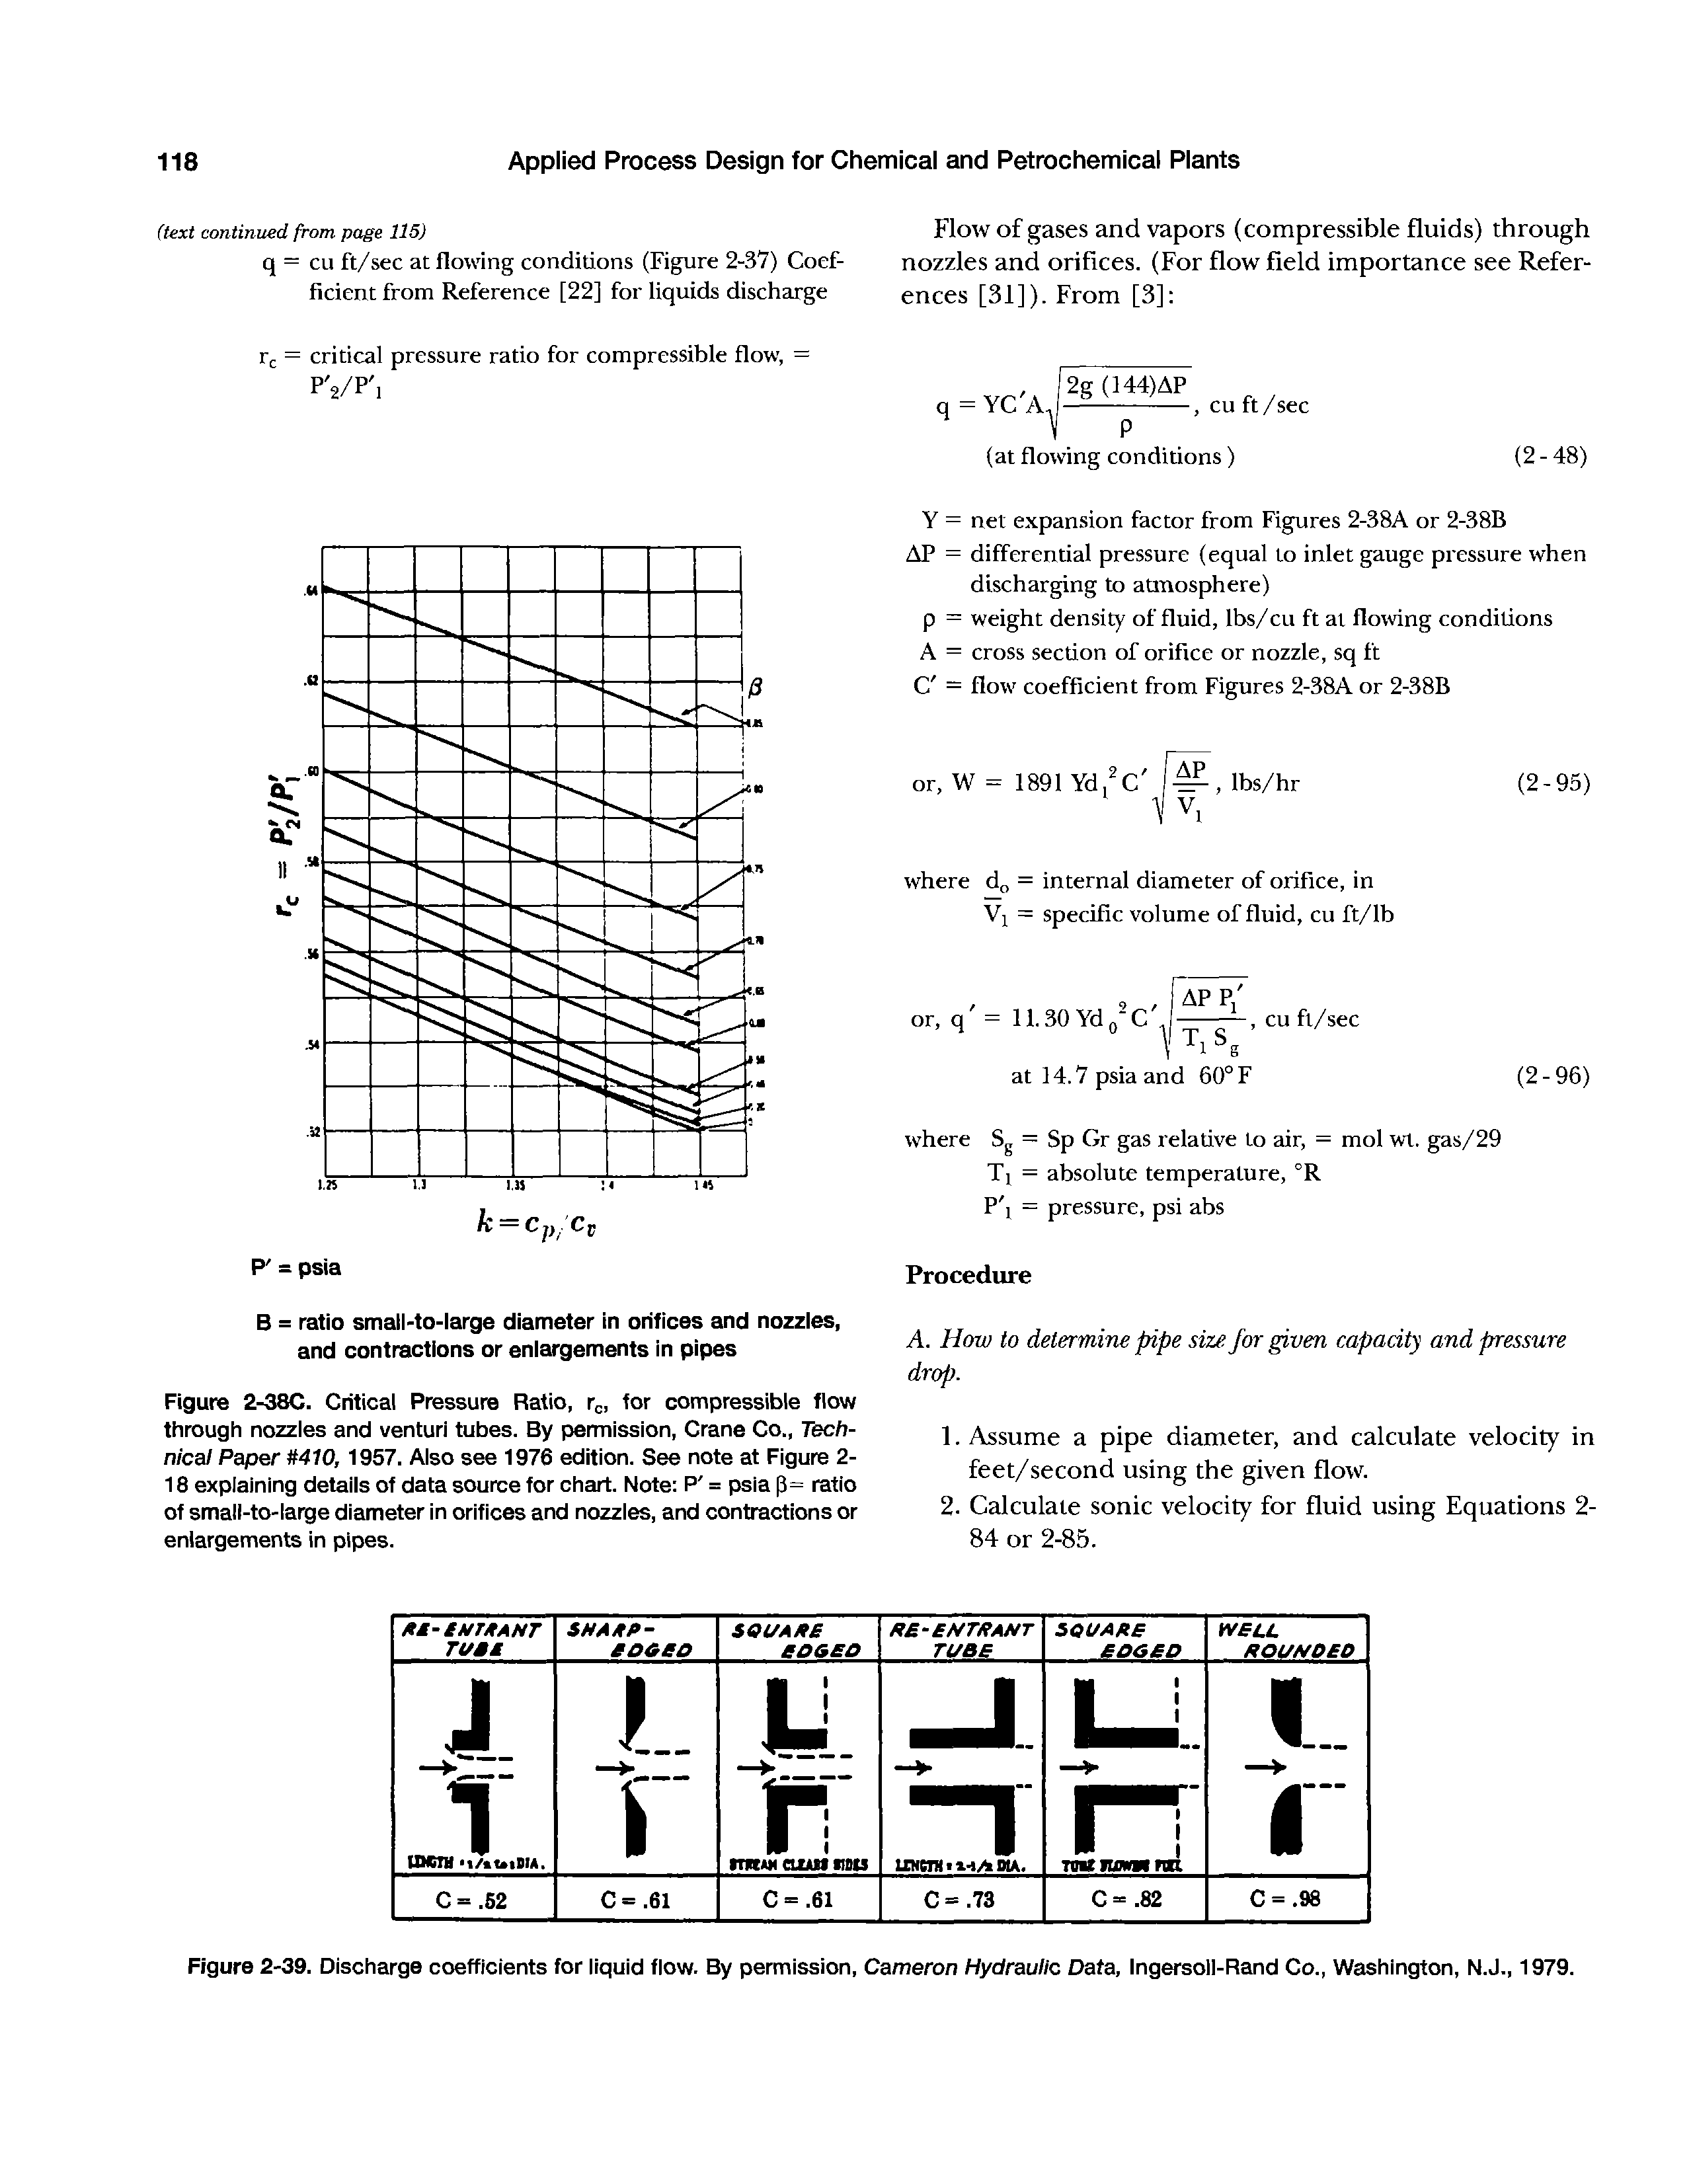 Figure 2-39. Discharge coefficients for liquid flow. By permission, Cameron Hydraulic Data, Ingersoll-Rand Co., Washington, N.J., 1979.